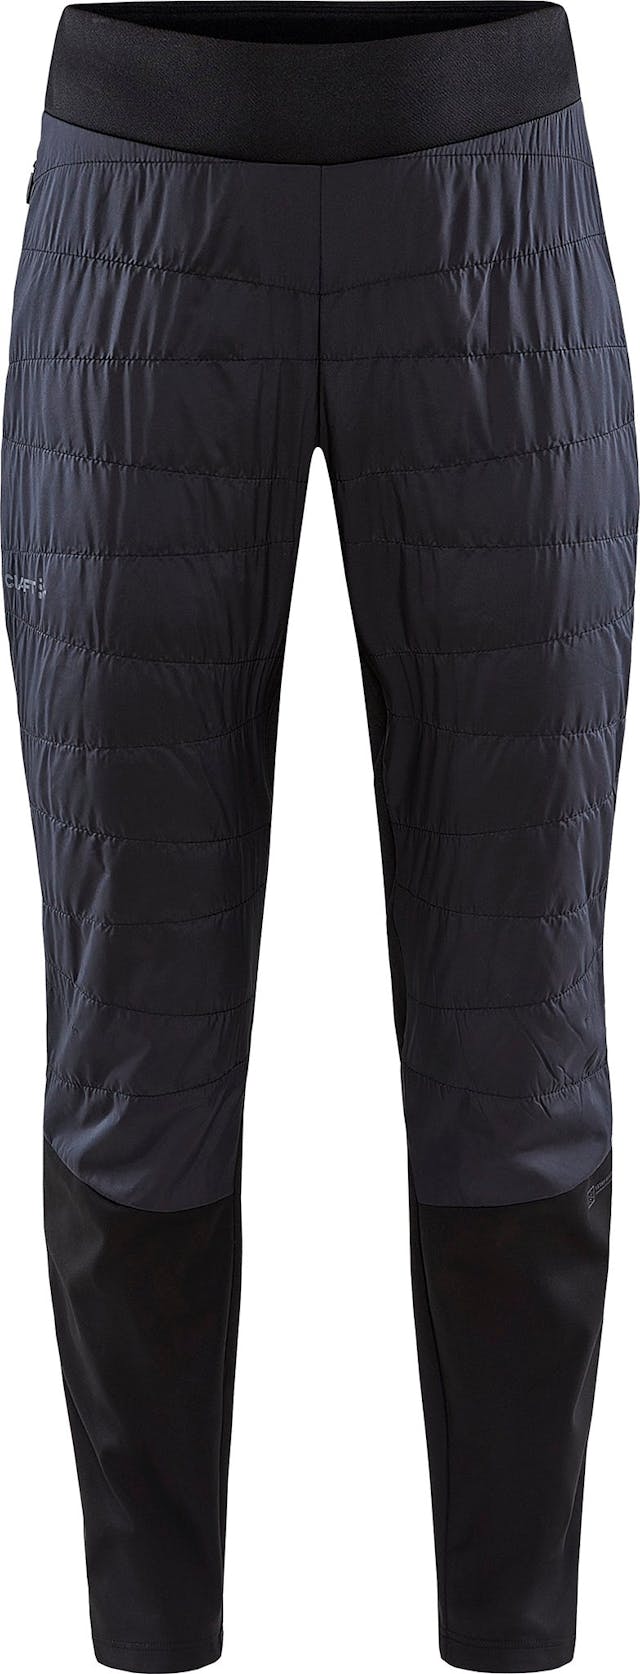 Product image for Core Nordic Training Insulated Pants - Women’s